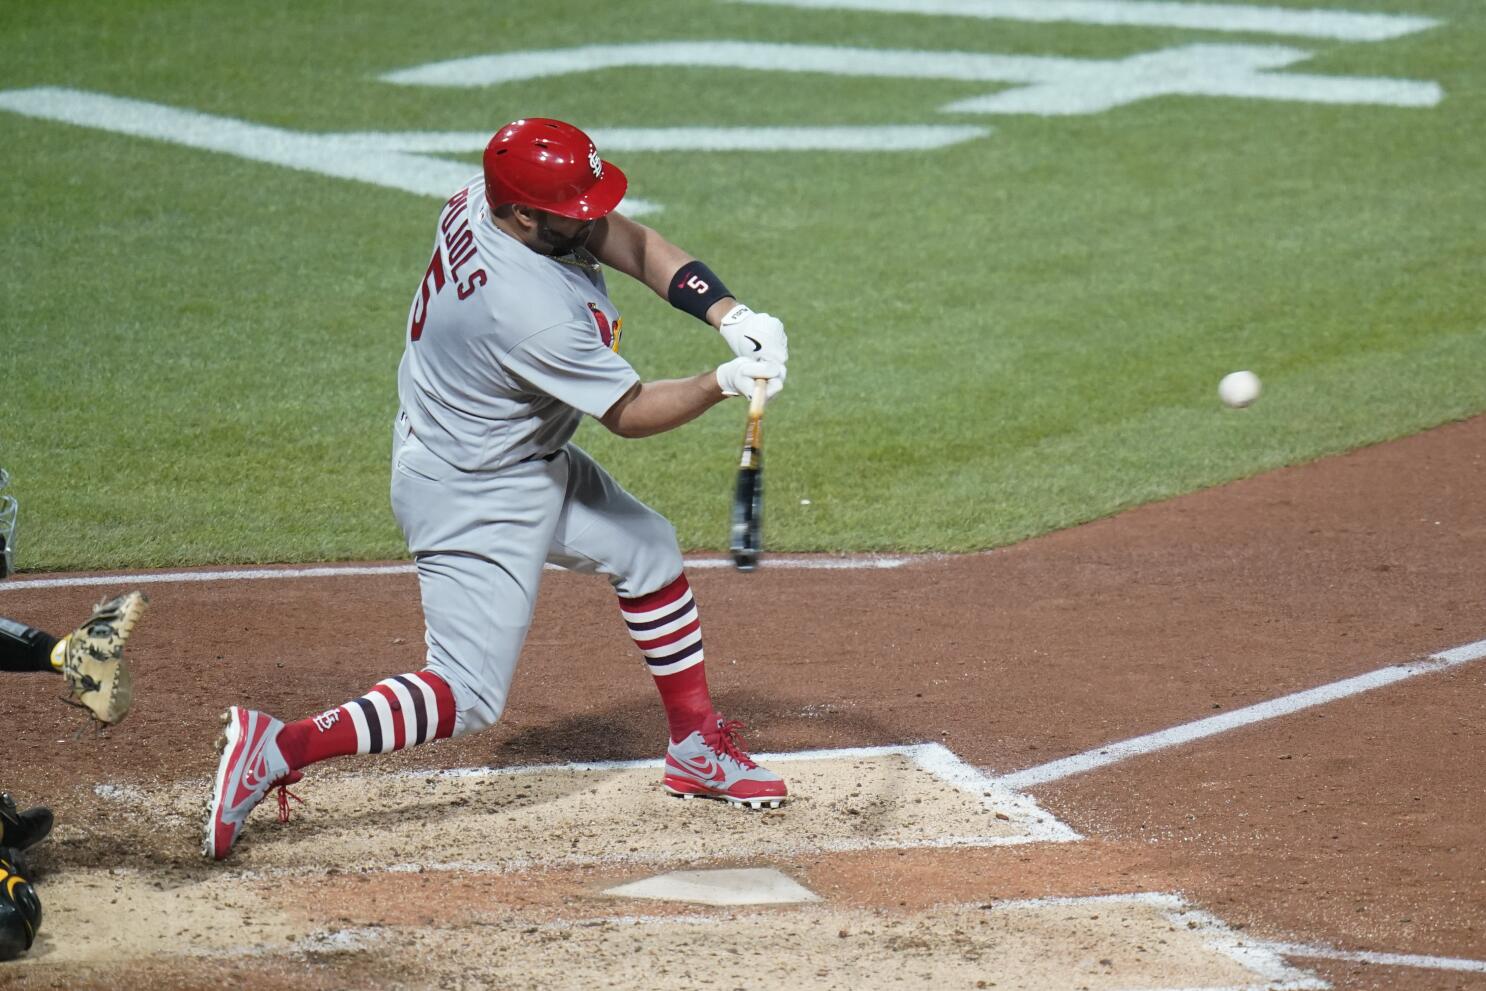 Pujols hits No. 703, moves past Ruth for 2nd in RBIs